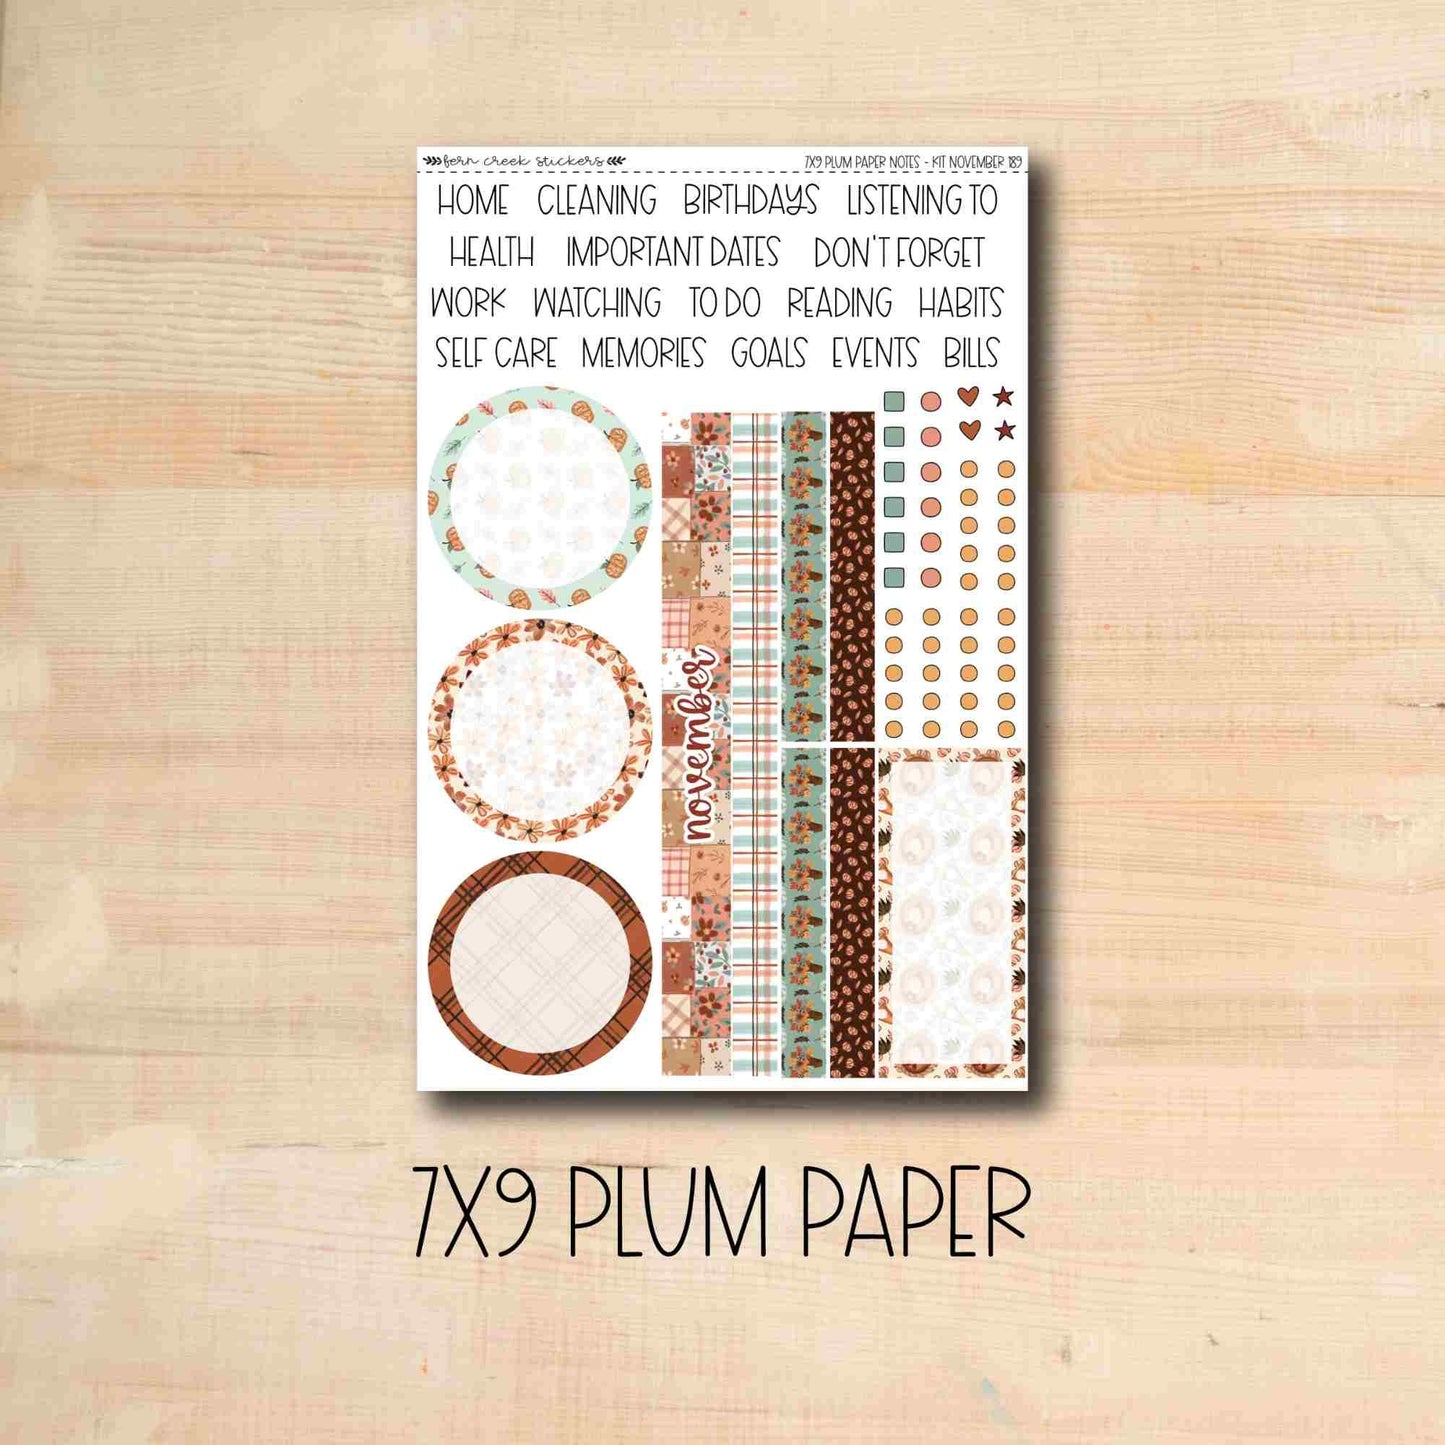 7x9 Plum NOTES-189 || GATHER 7x9 Plum Paper November notes page